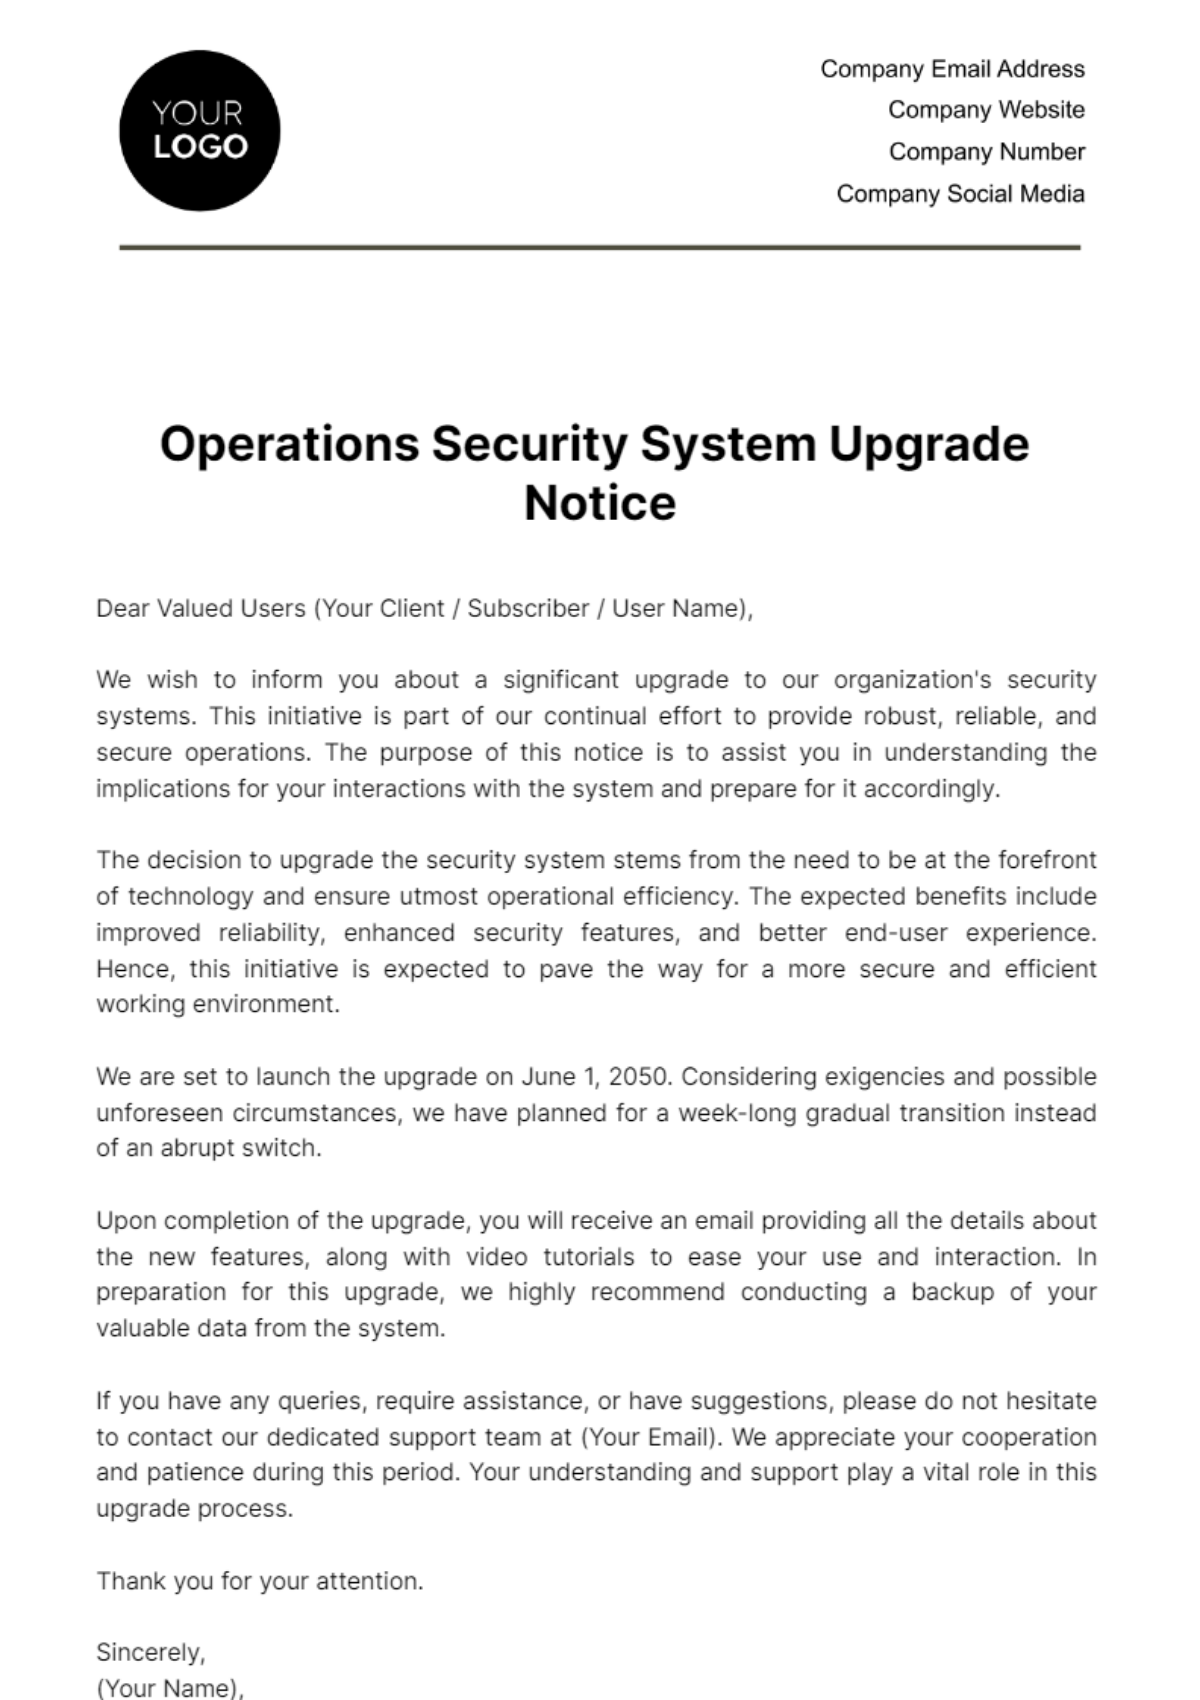 Free Operations Security System Upgrade Notice Template